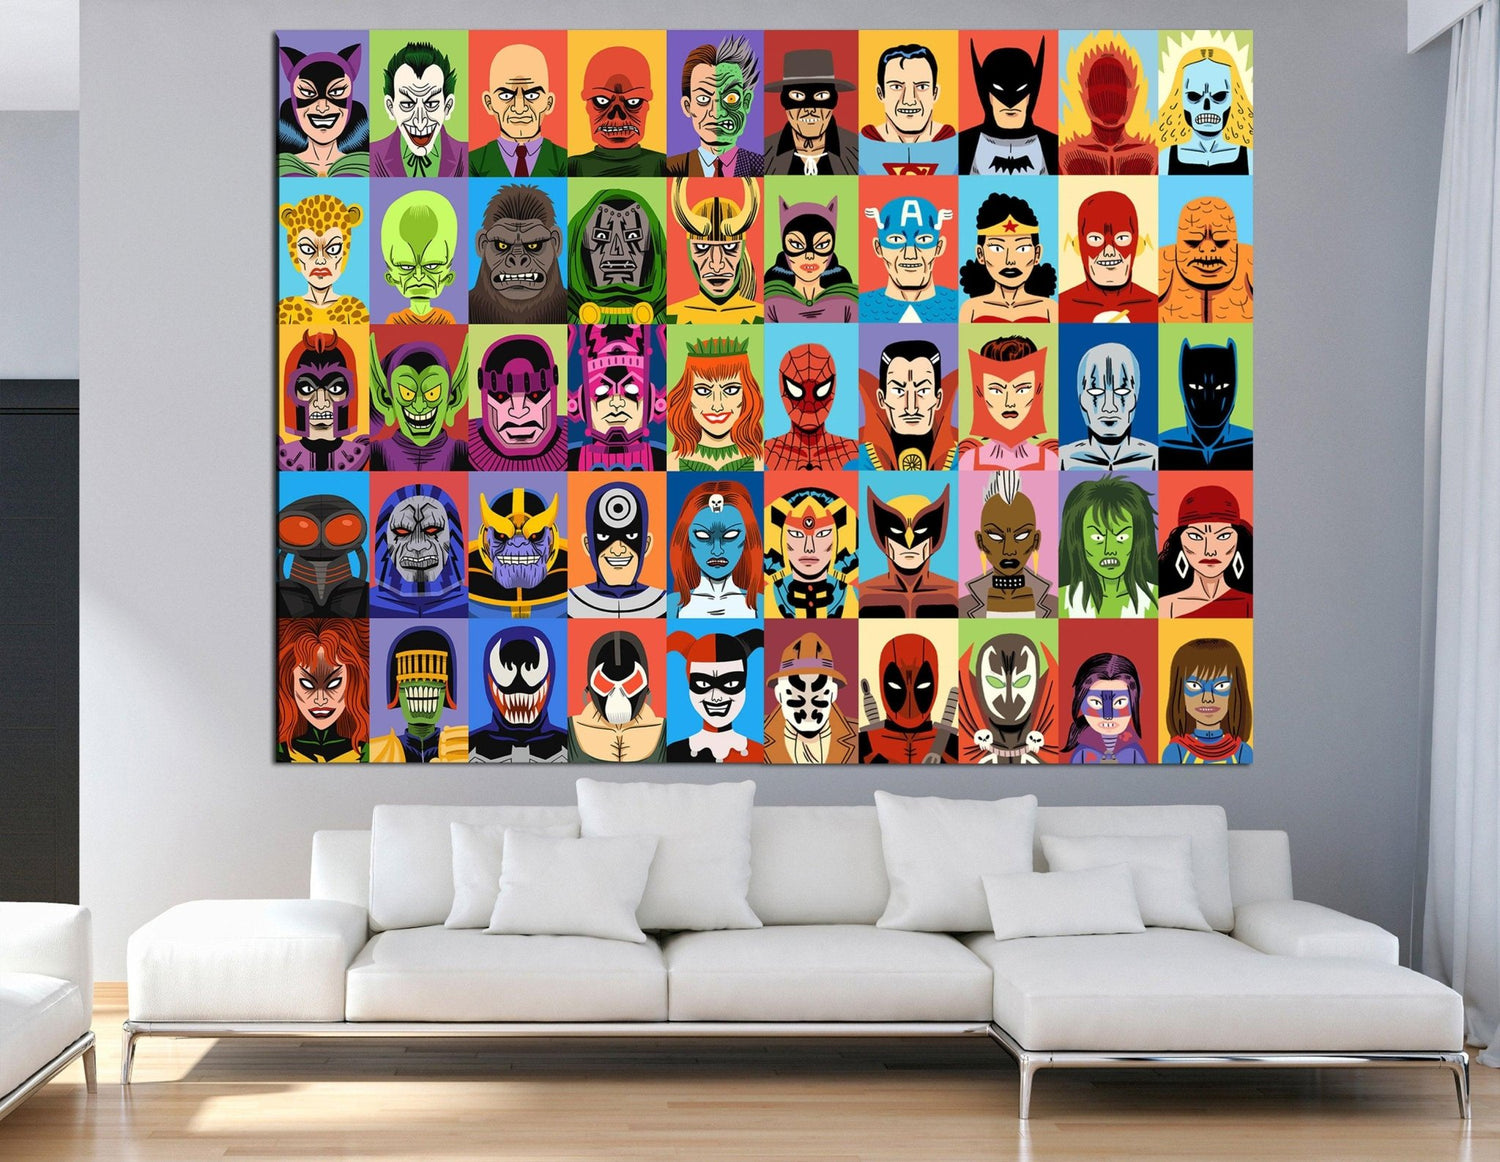 Poster MARVEL - group | Wall Art, Gifts & Merchandise 